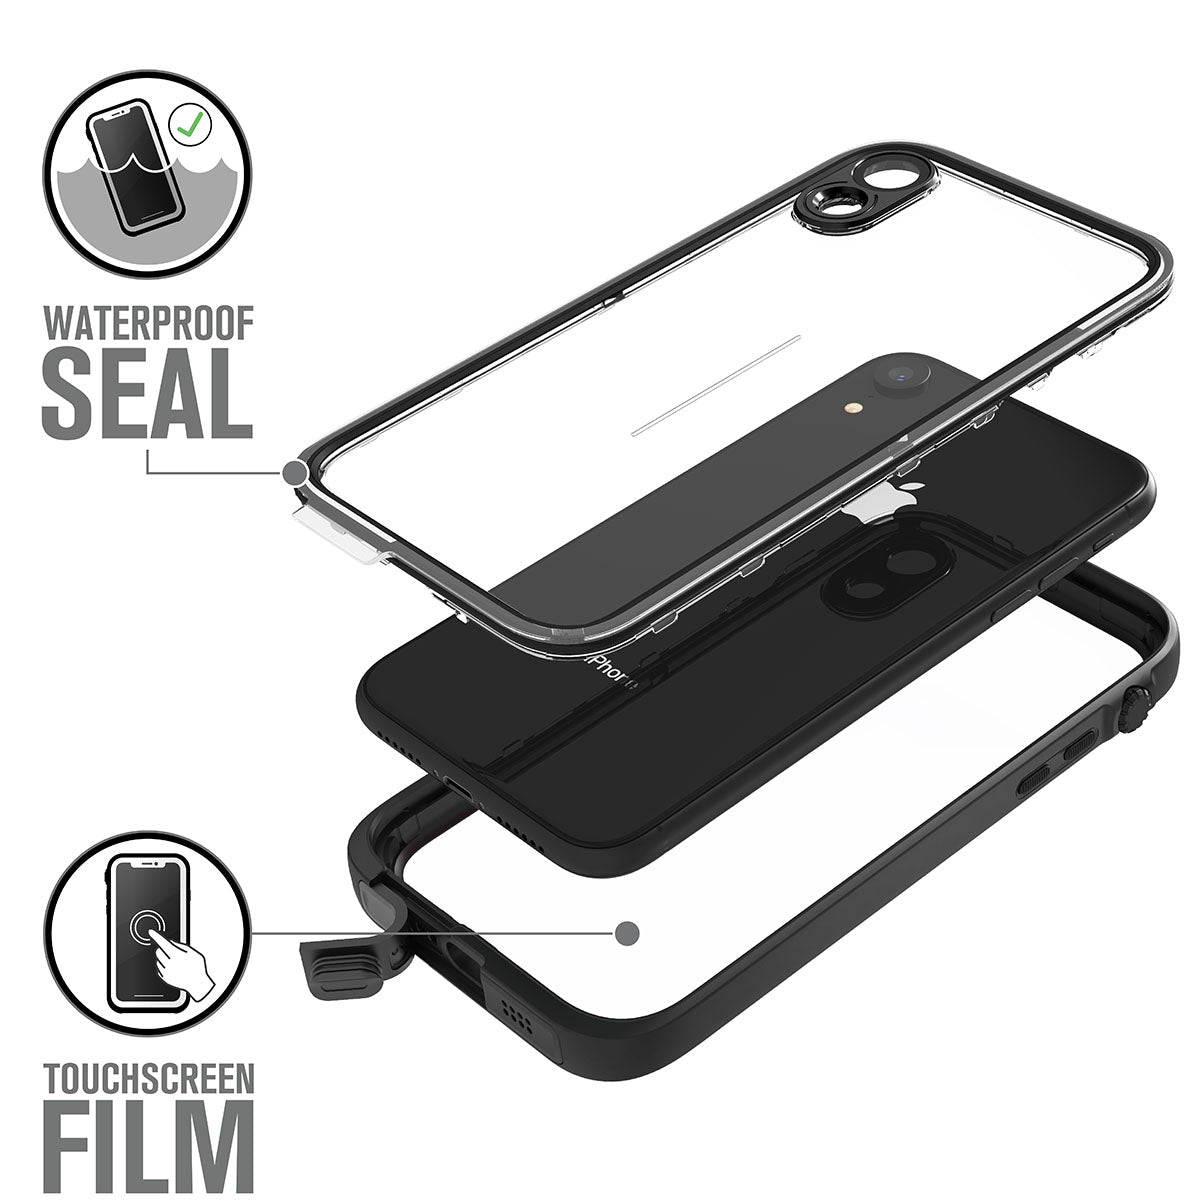 Catalyst iphone x/xr/xs/xs max waterproof case x showing how secure the case is in stealth black text reads waterproof seal touchscreen film